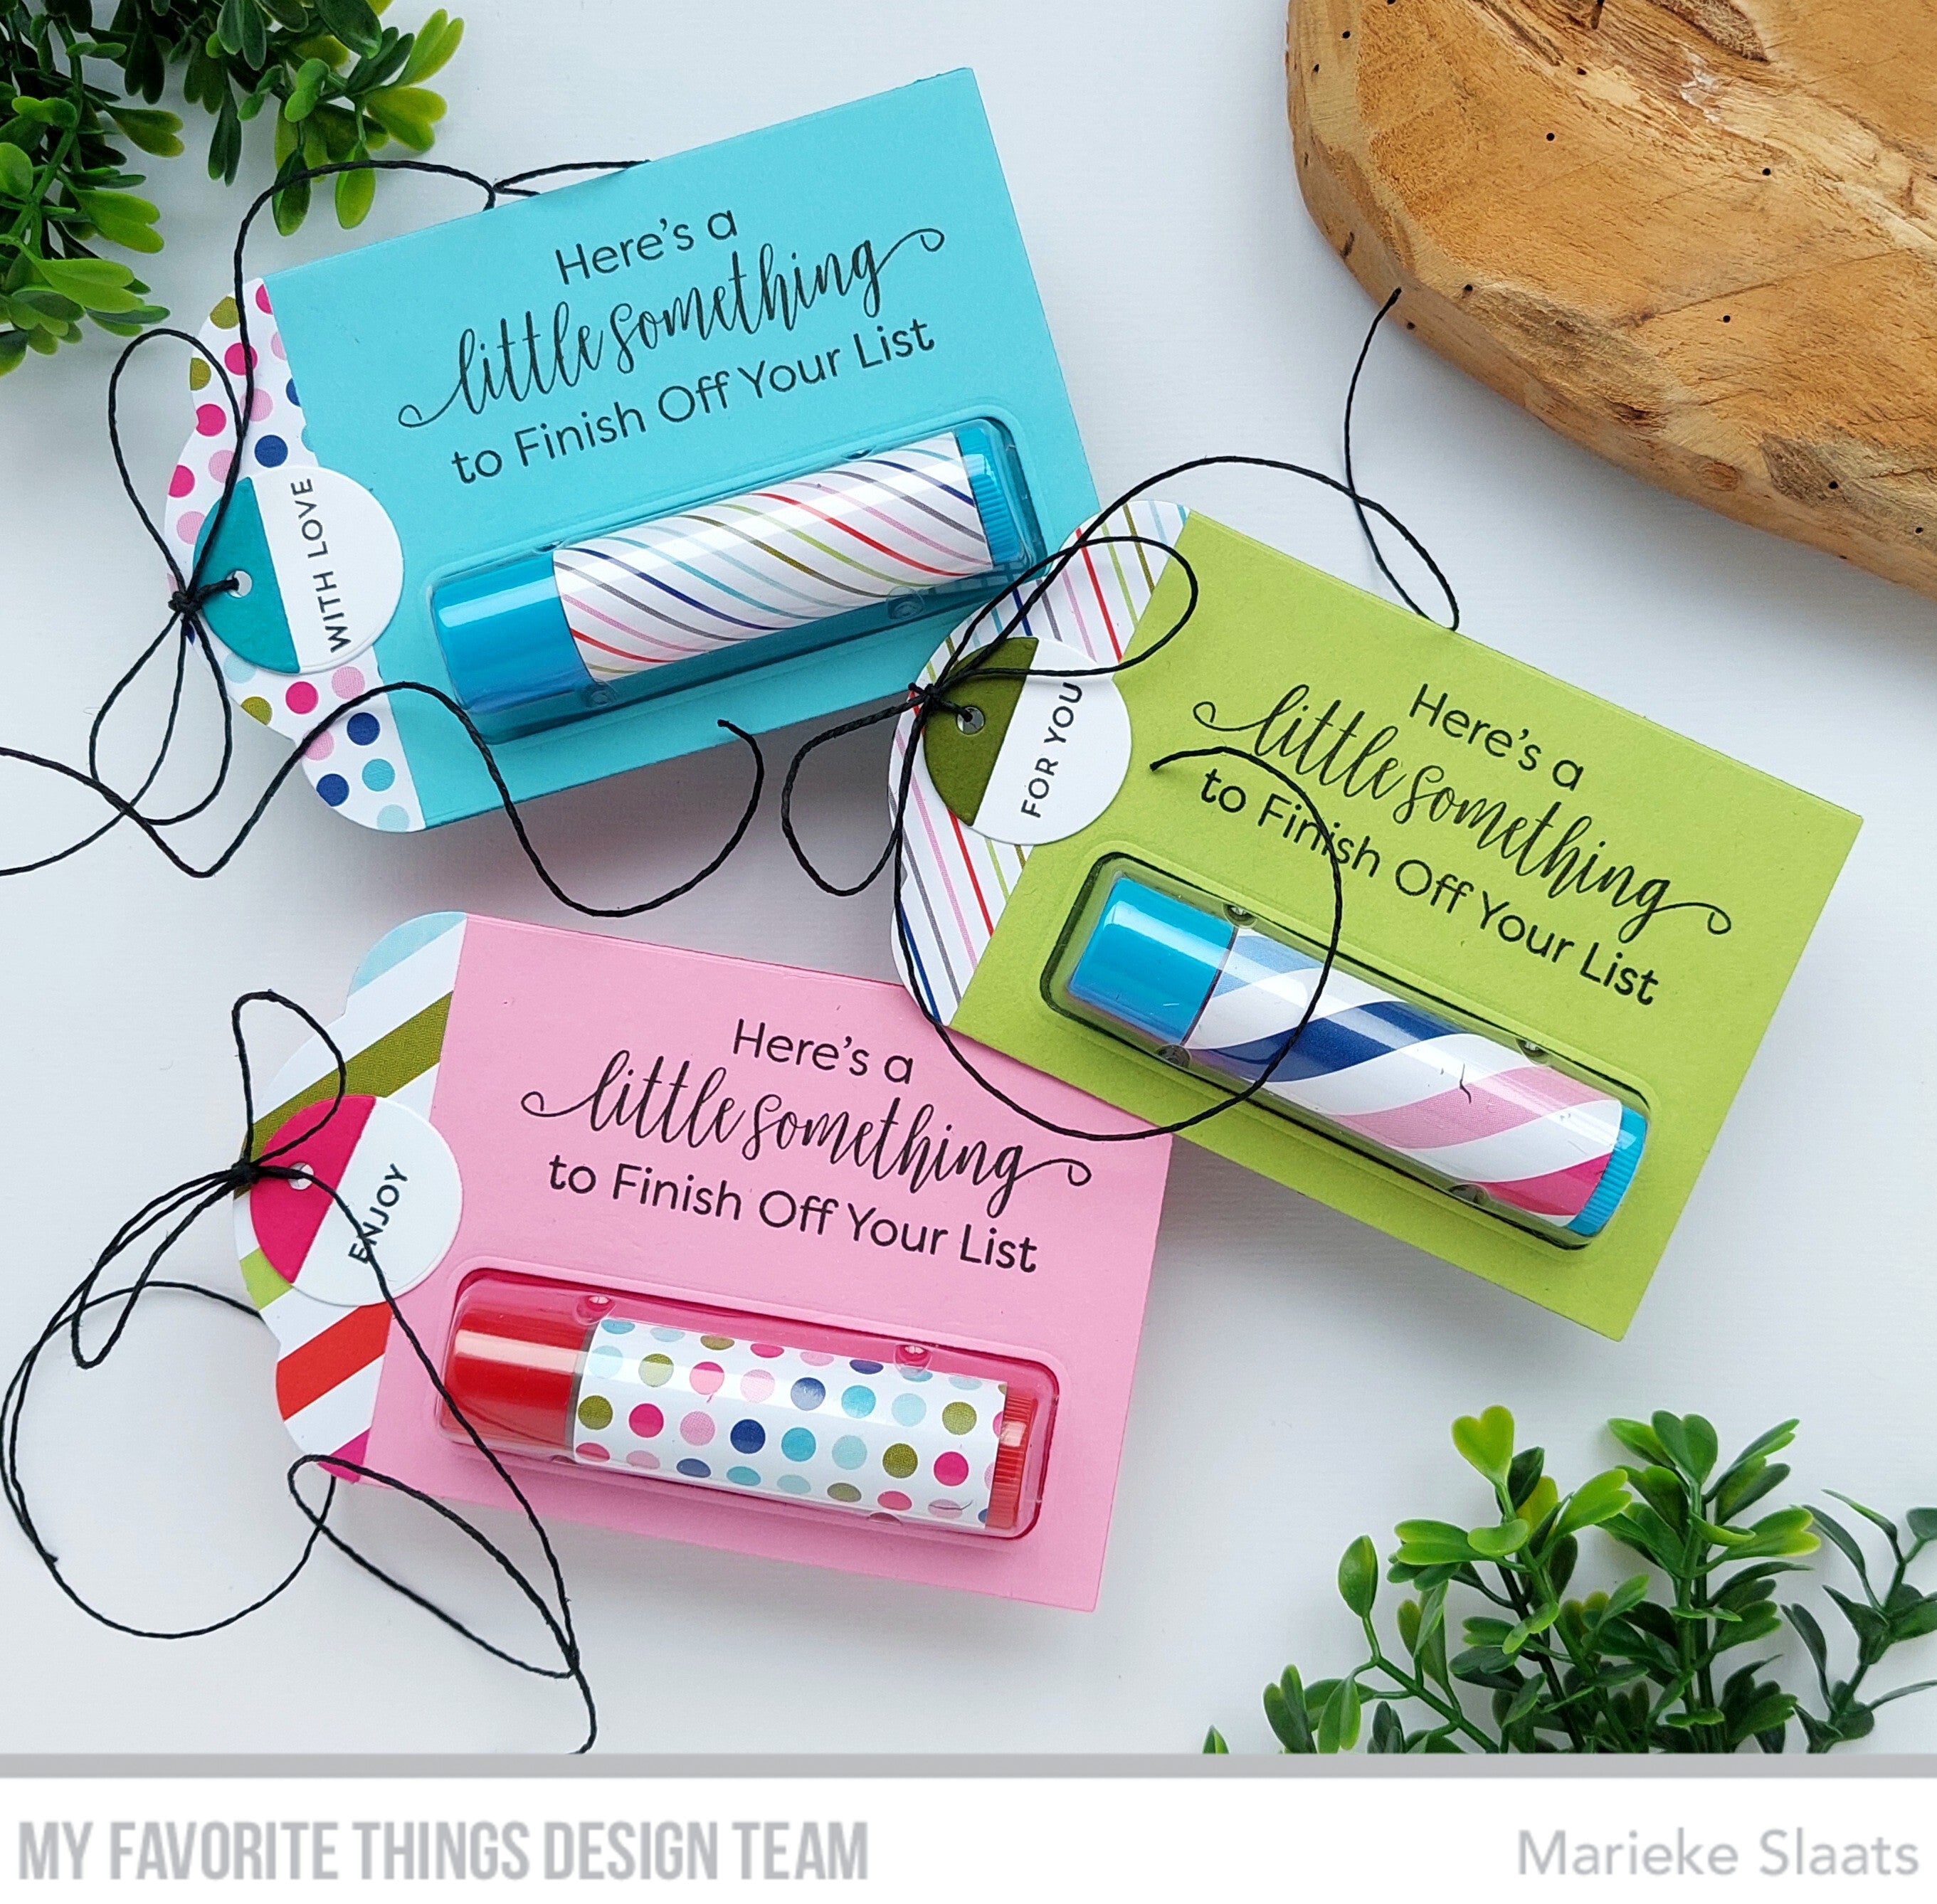 Handmade tags from Marieke Slaats featuring products from My Favorite Things #mftstamps